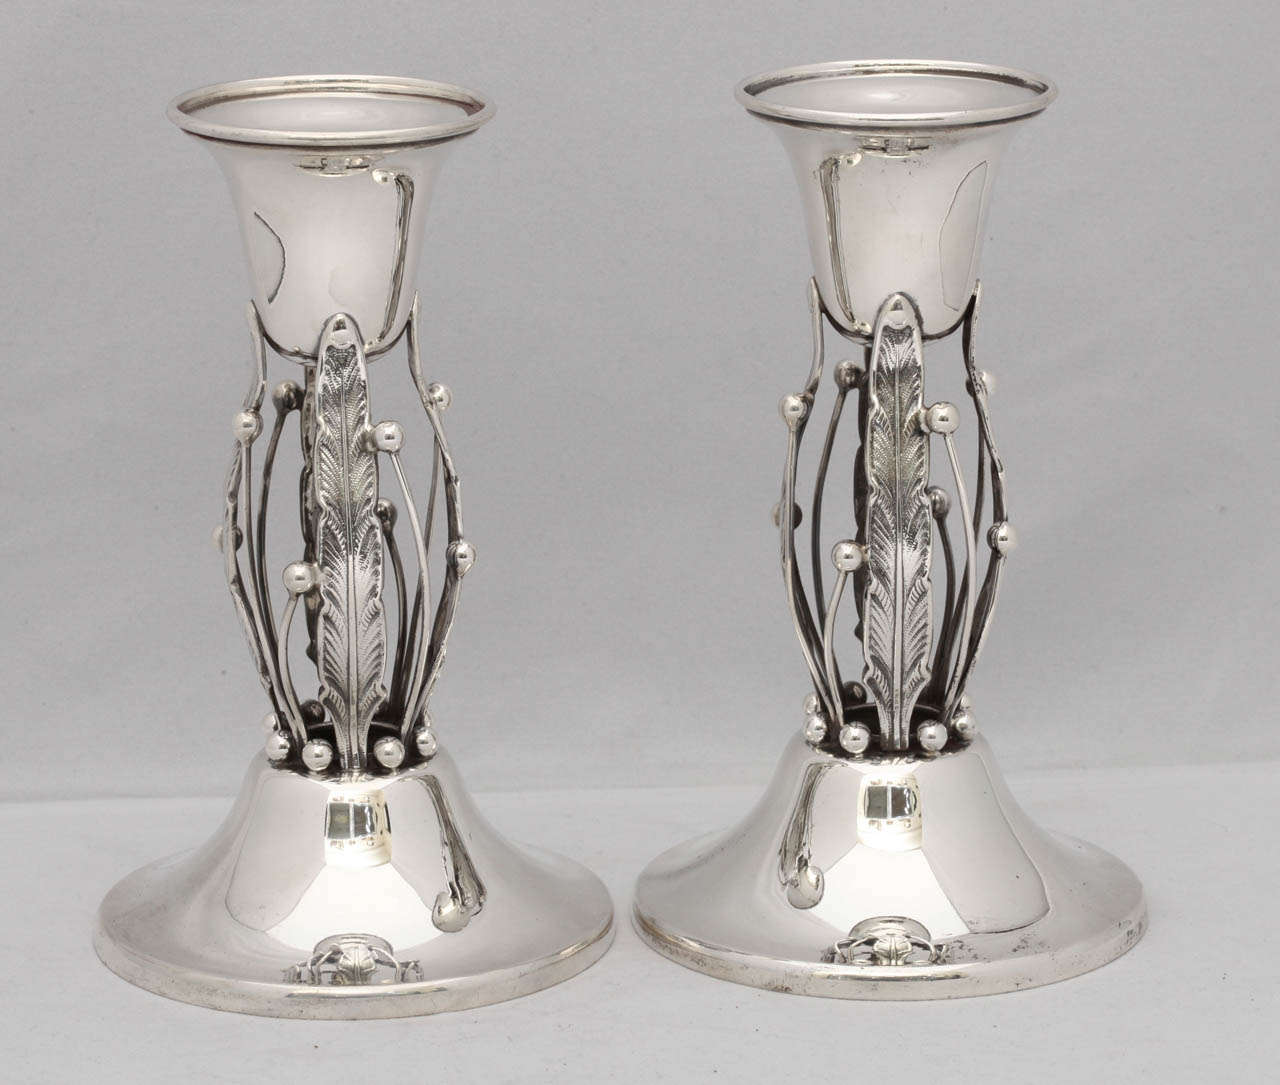 Beautiful pair of Art Deco, sterling silver candlesticks, American, Ca. 1920's - 1930's. @6 3/4